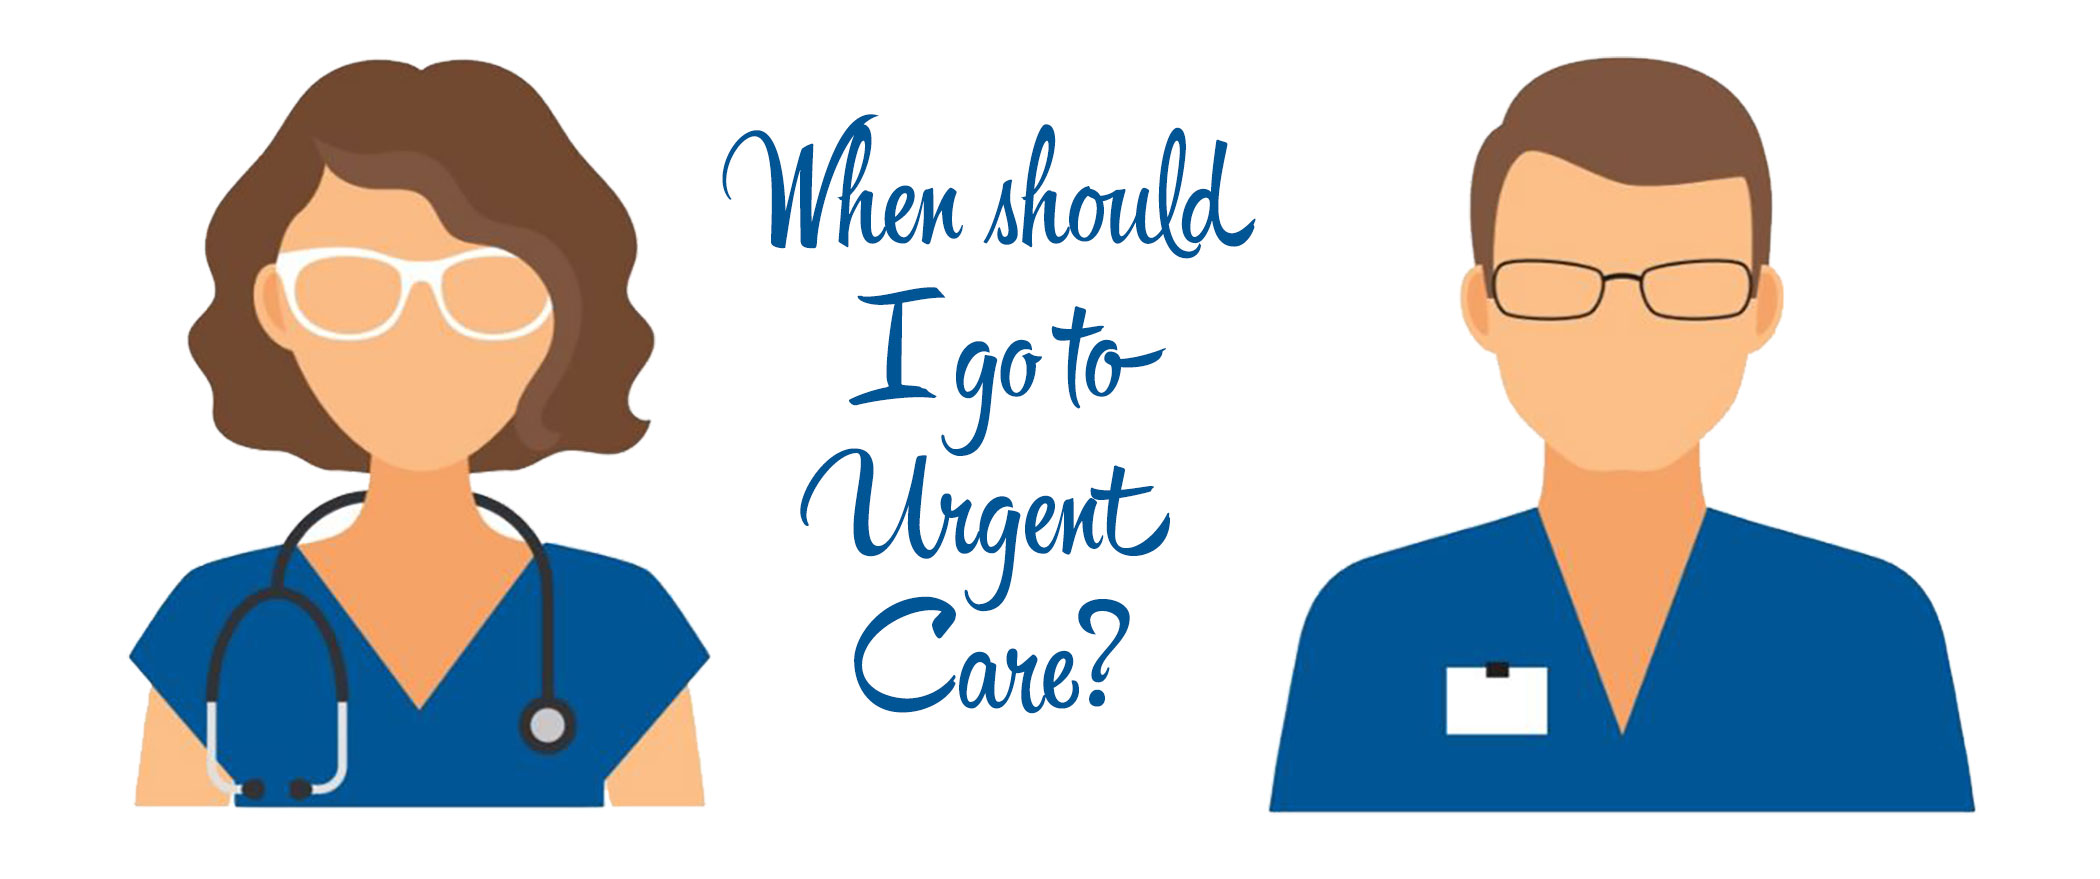 When Should I go to Urgent Care?